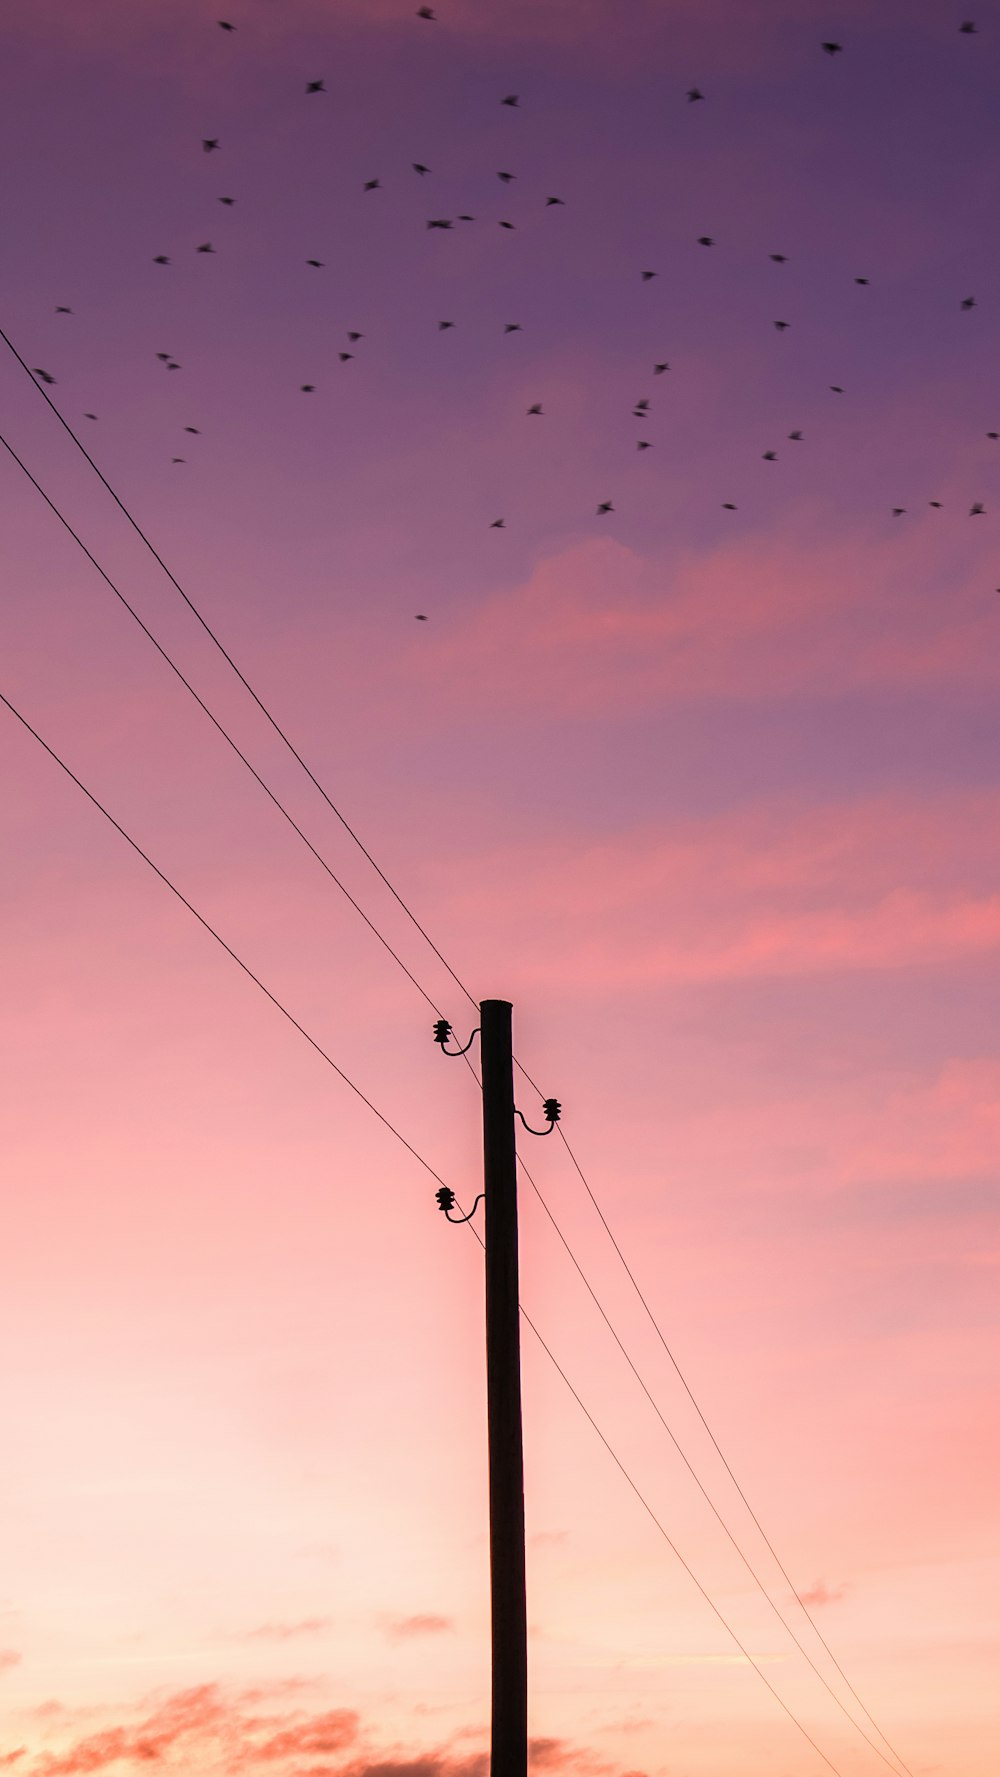 flock of birds flying over the electric post